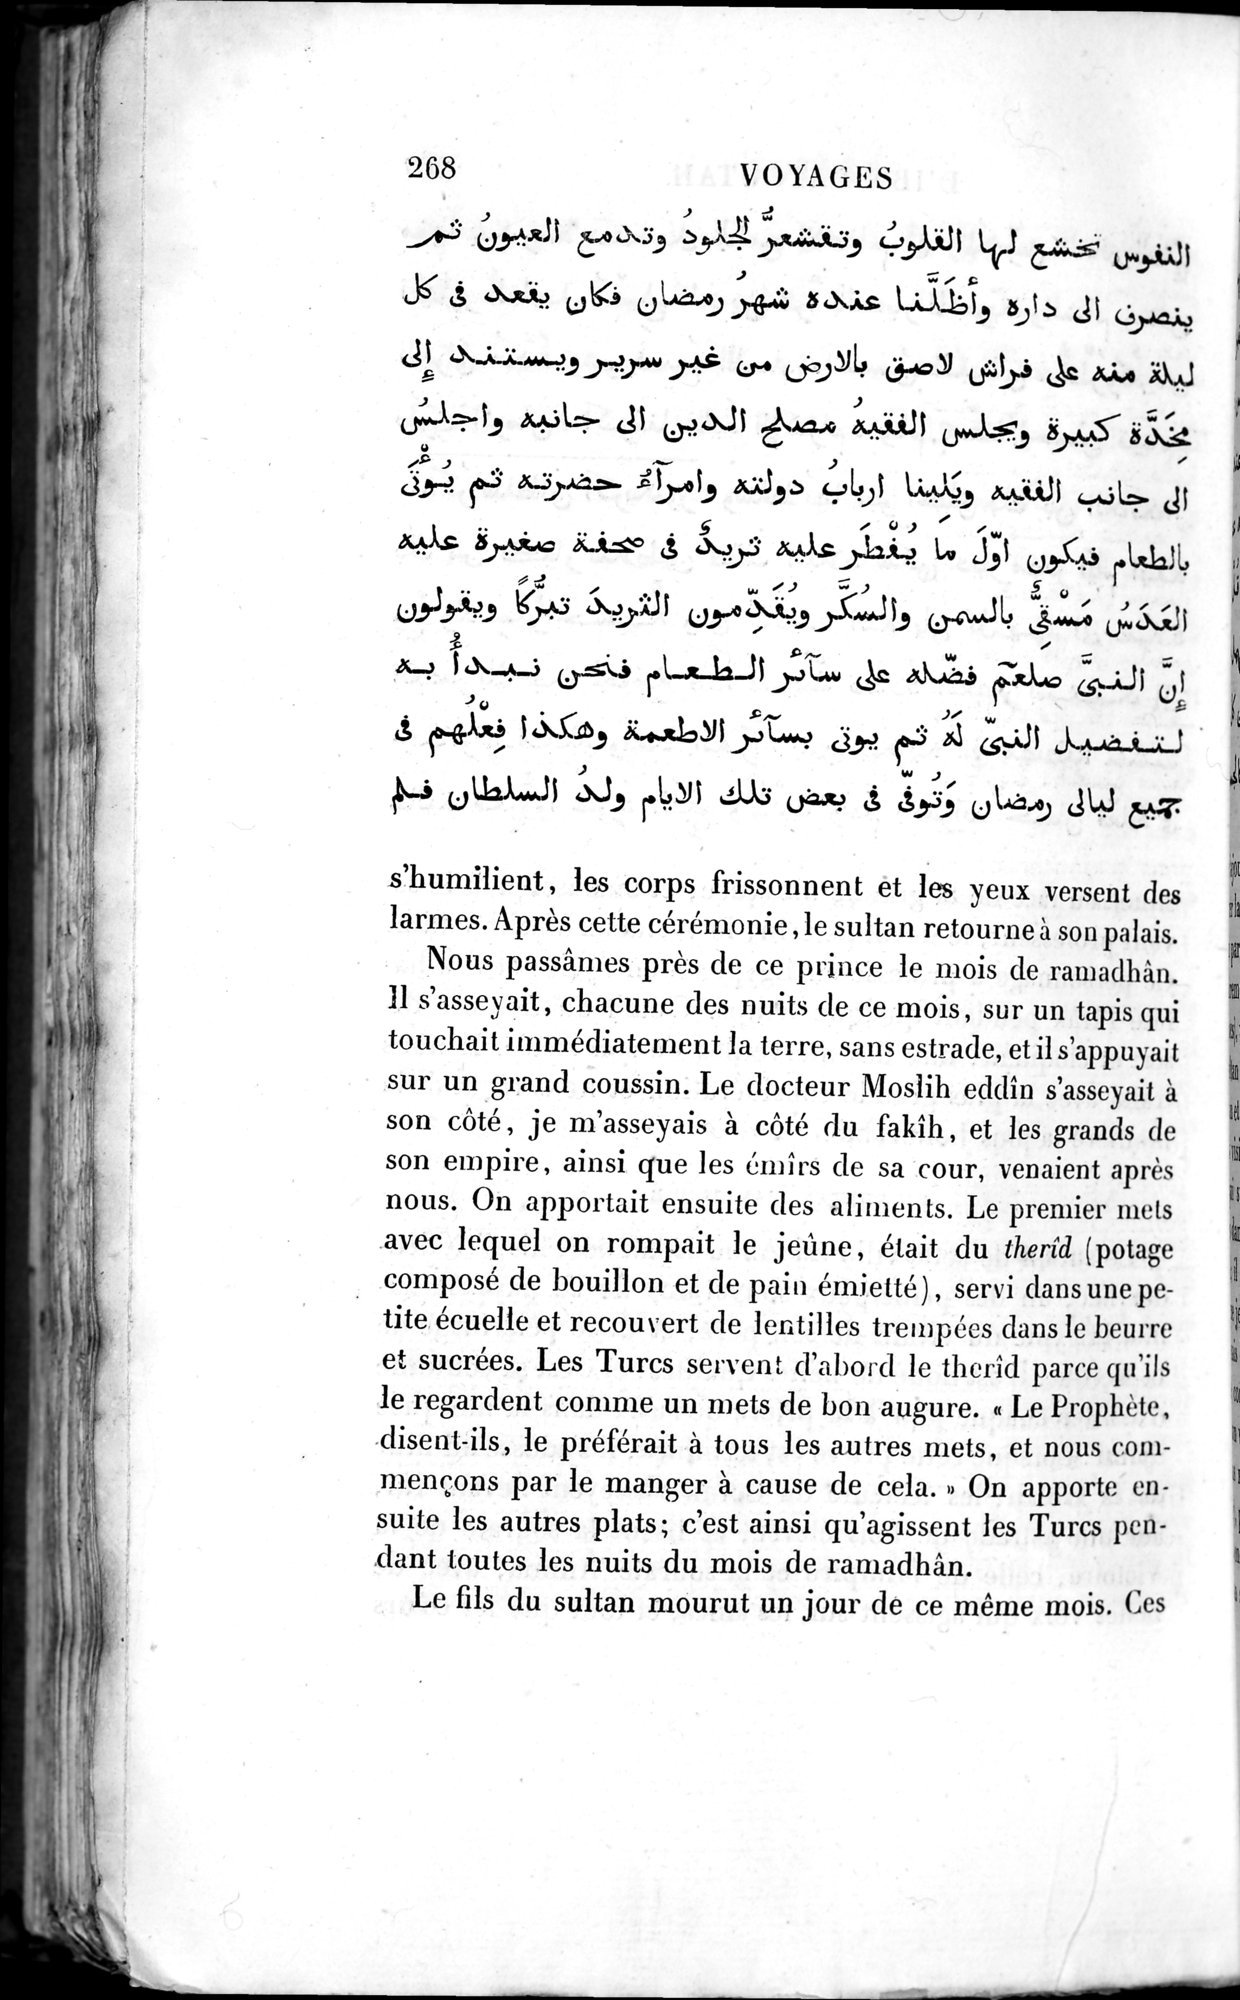 Voyages d'Ibn Batoutah : vol.2 / Page 296 (Grayscale High Resolution Image)